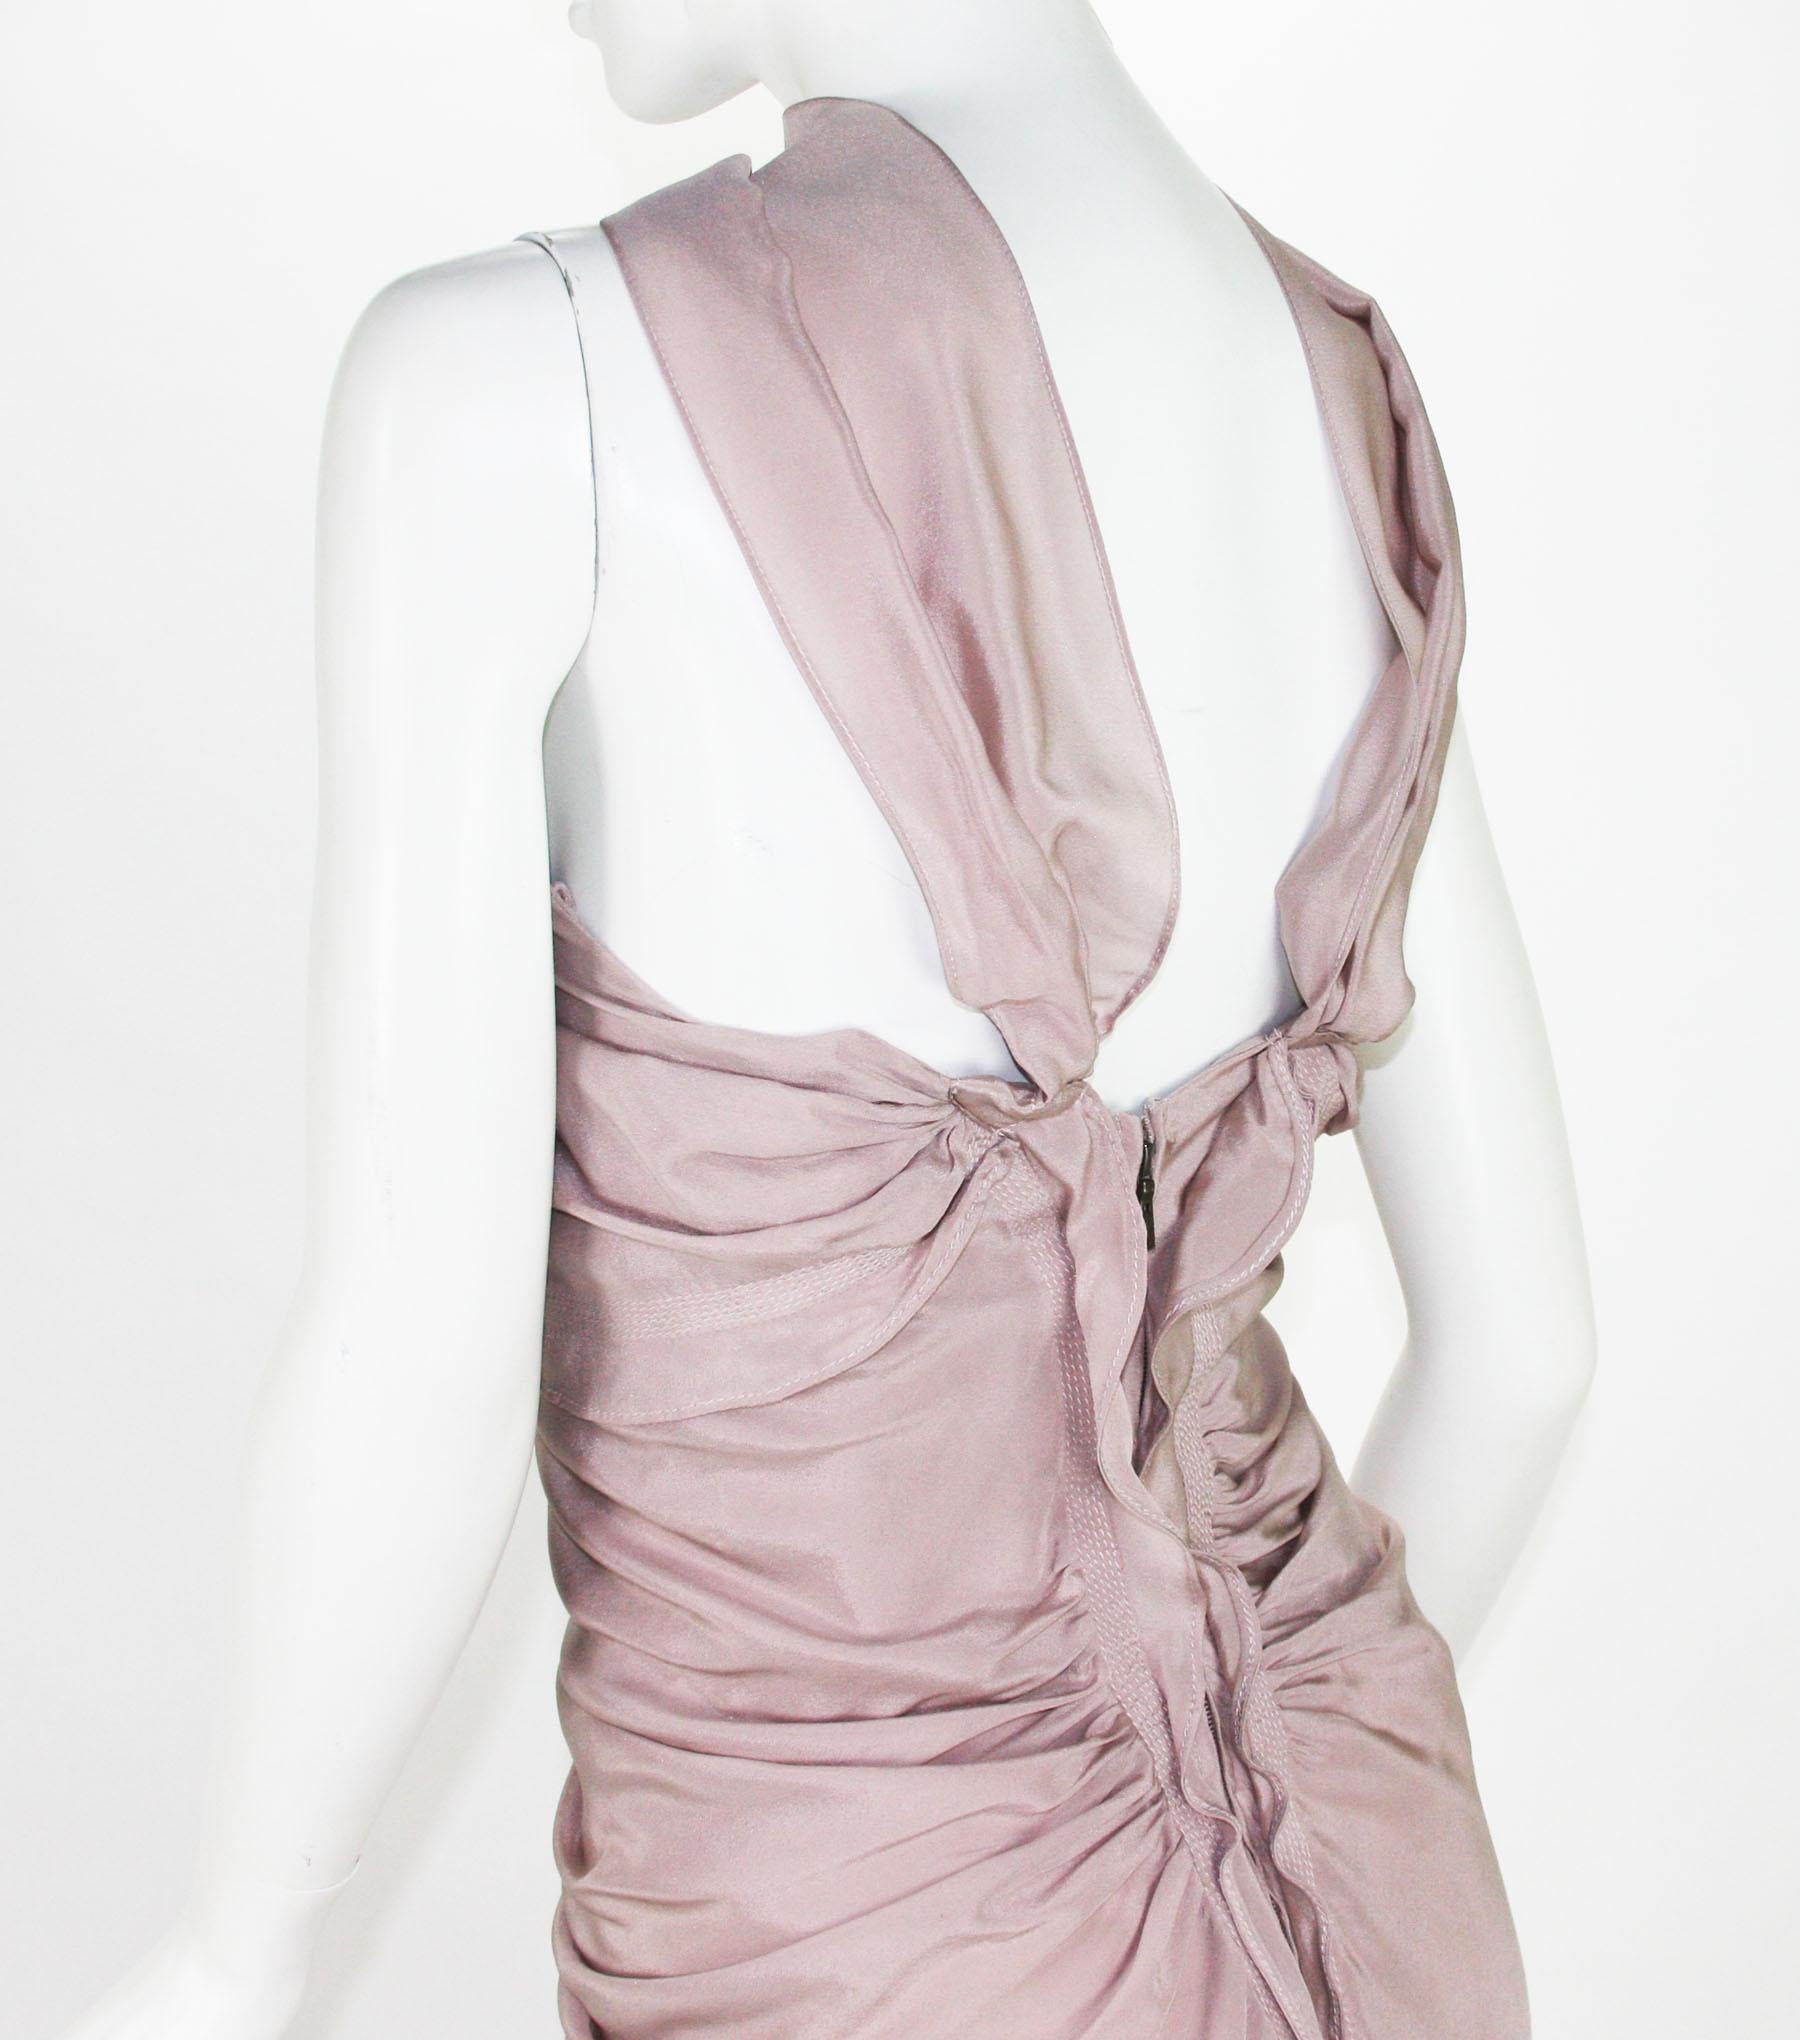 Tom Ford for Yves Saint Laurent Fall 2003 Draped Silk Corset Dress Fr. 38 - US 6 In Excellent Condition For Sale In Montgomery, TX